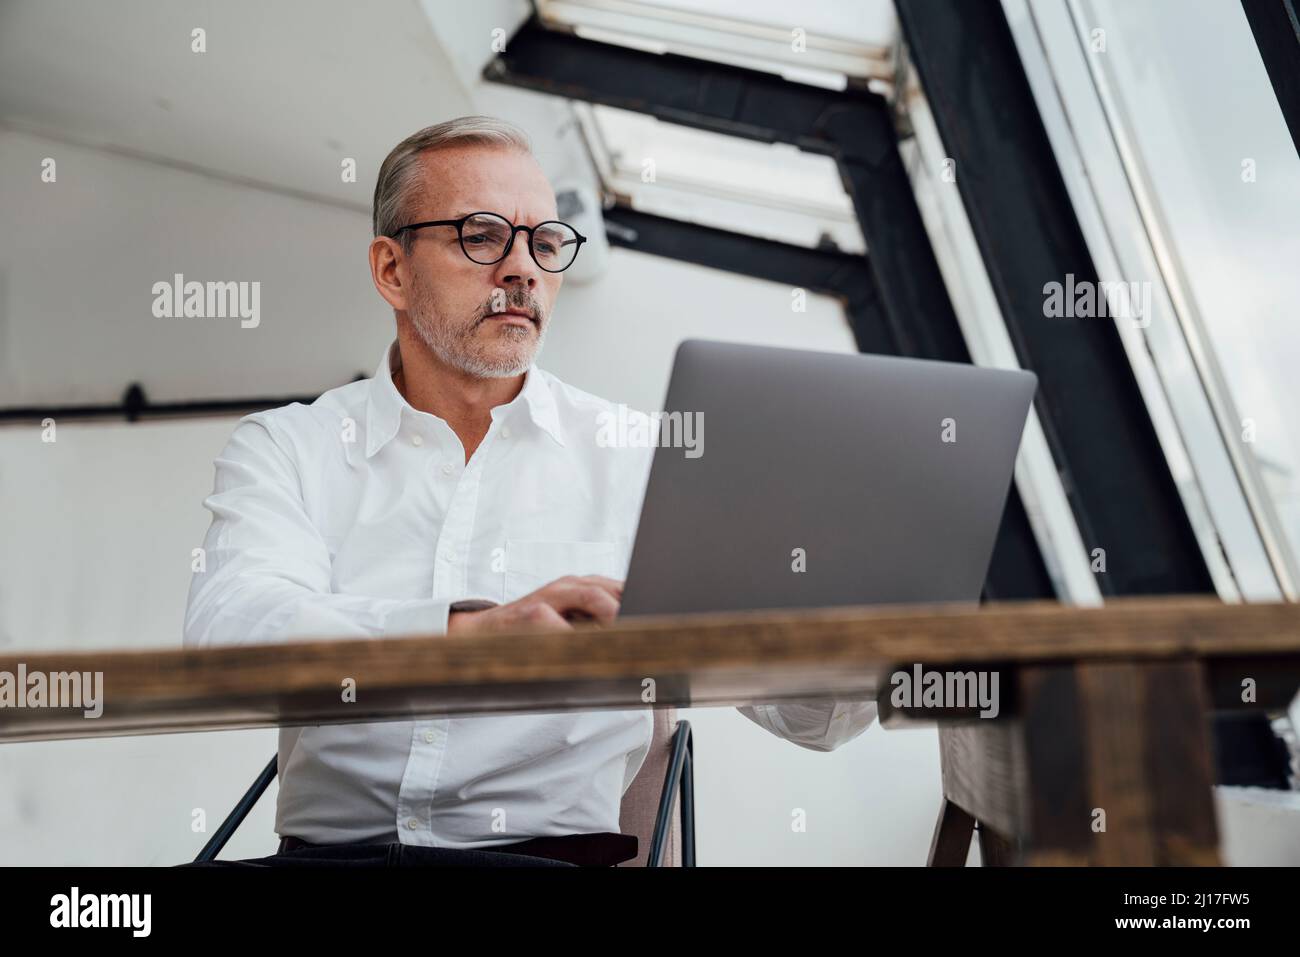 Businessman working on laptop at startup office Stock Photo